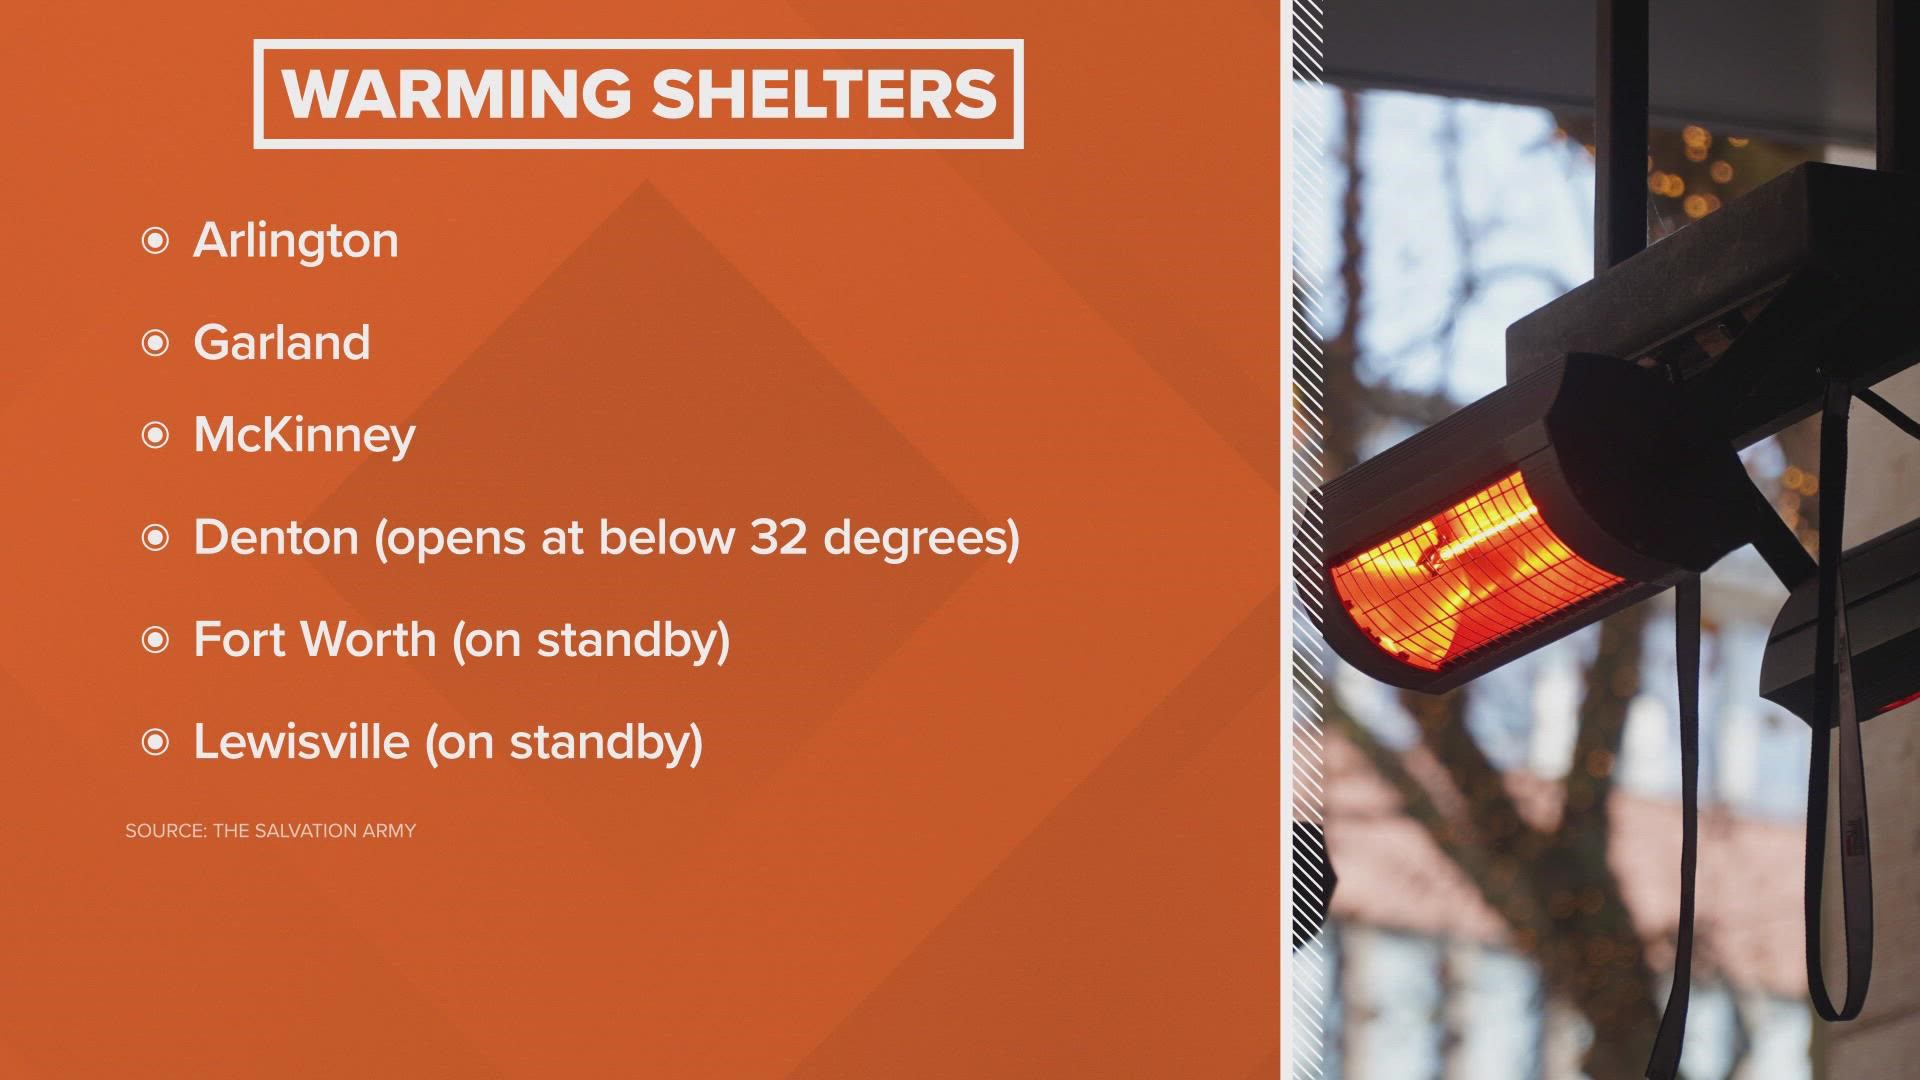 Some DFW shelters might not open until temperatures reach freezing.